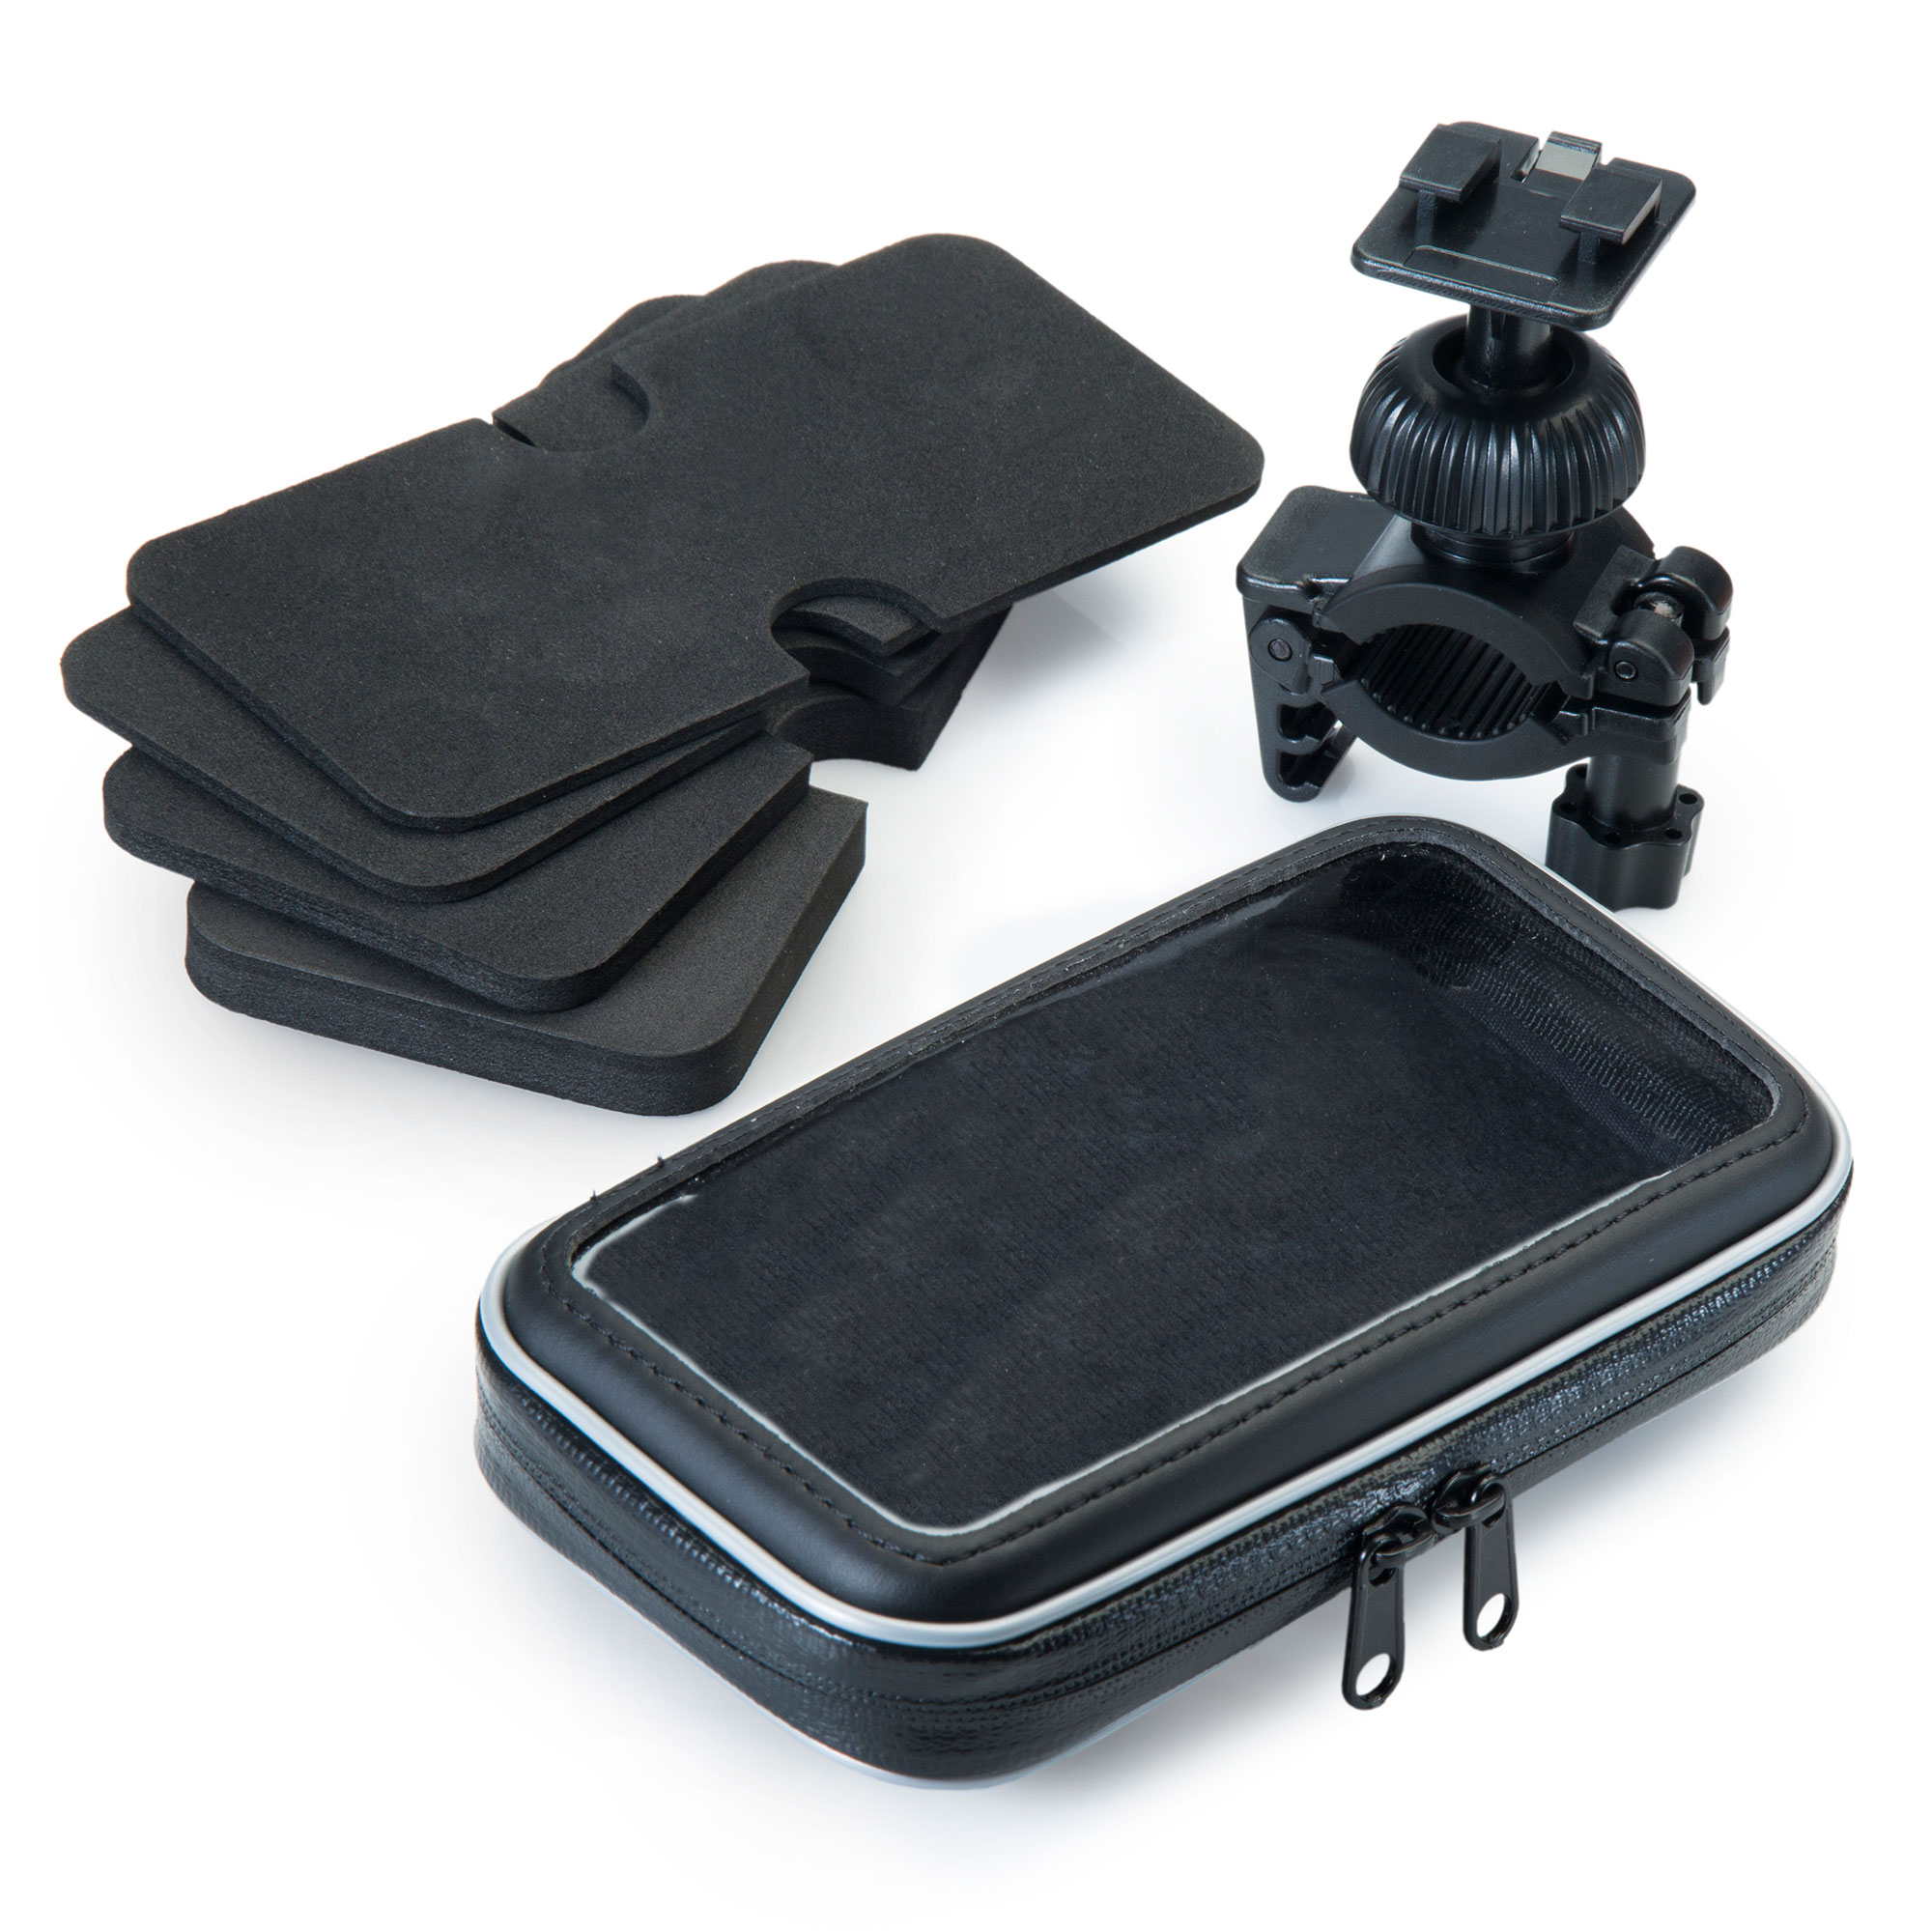 Heavy Duty Weather Resistant Bicycle / Motorcycle Handlebar Mount Holder Designed for the LG Tegra 2